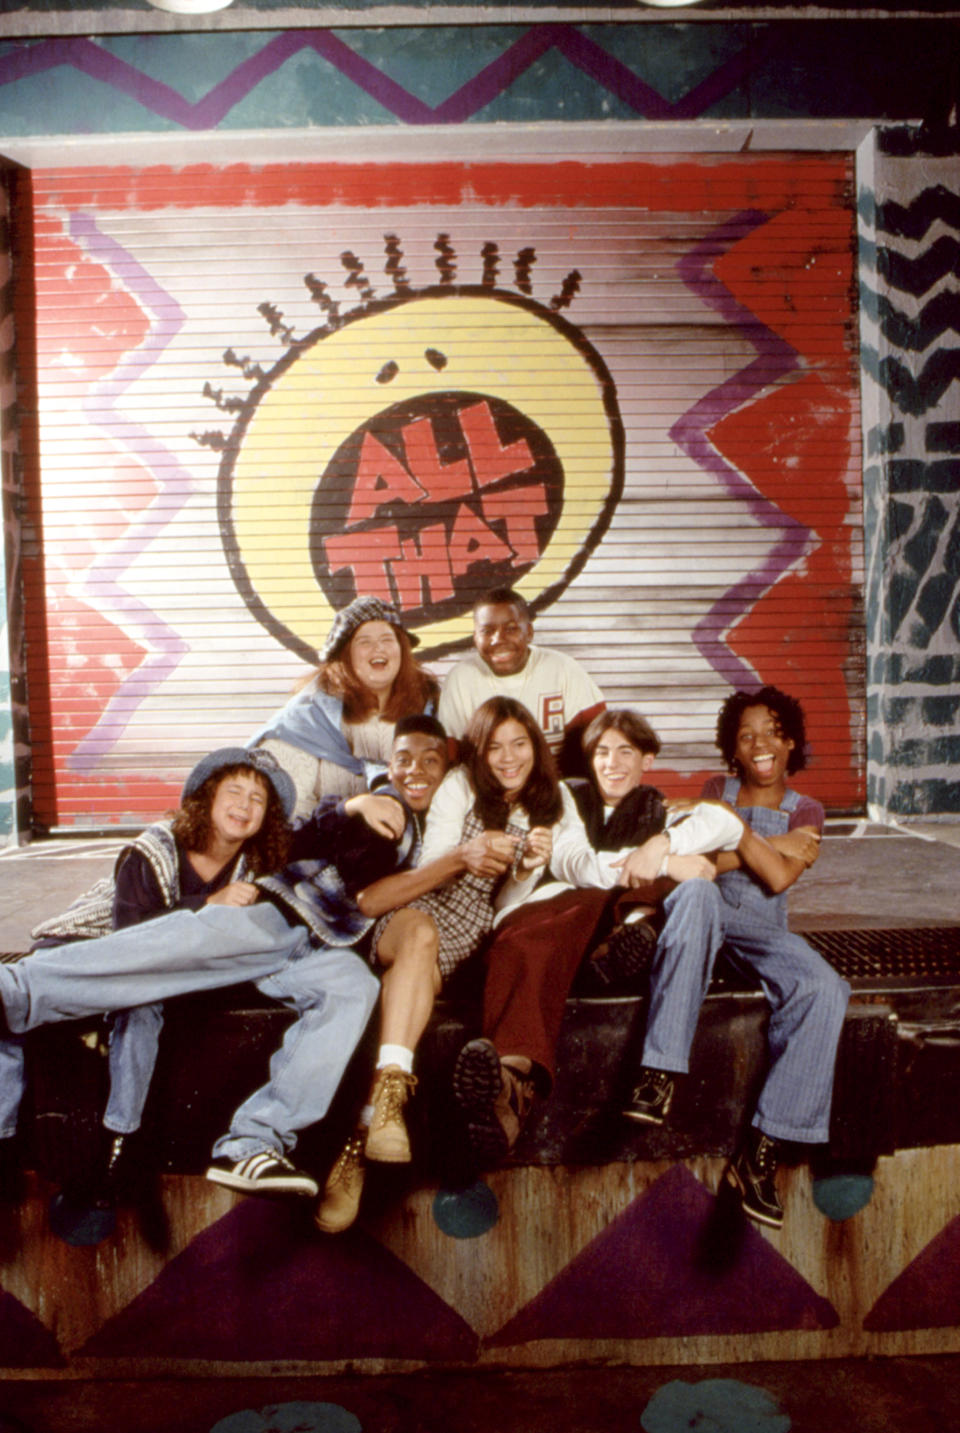 Cast of "All That" posing in front of show's logo, in casual 90s attire, smiling